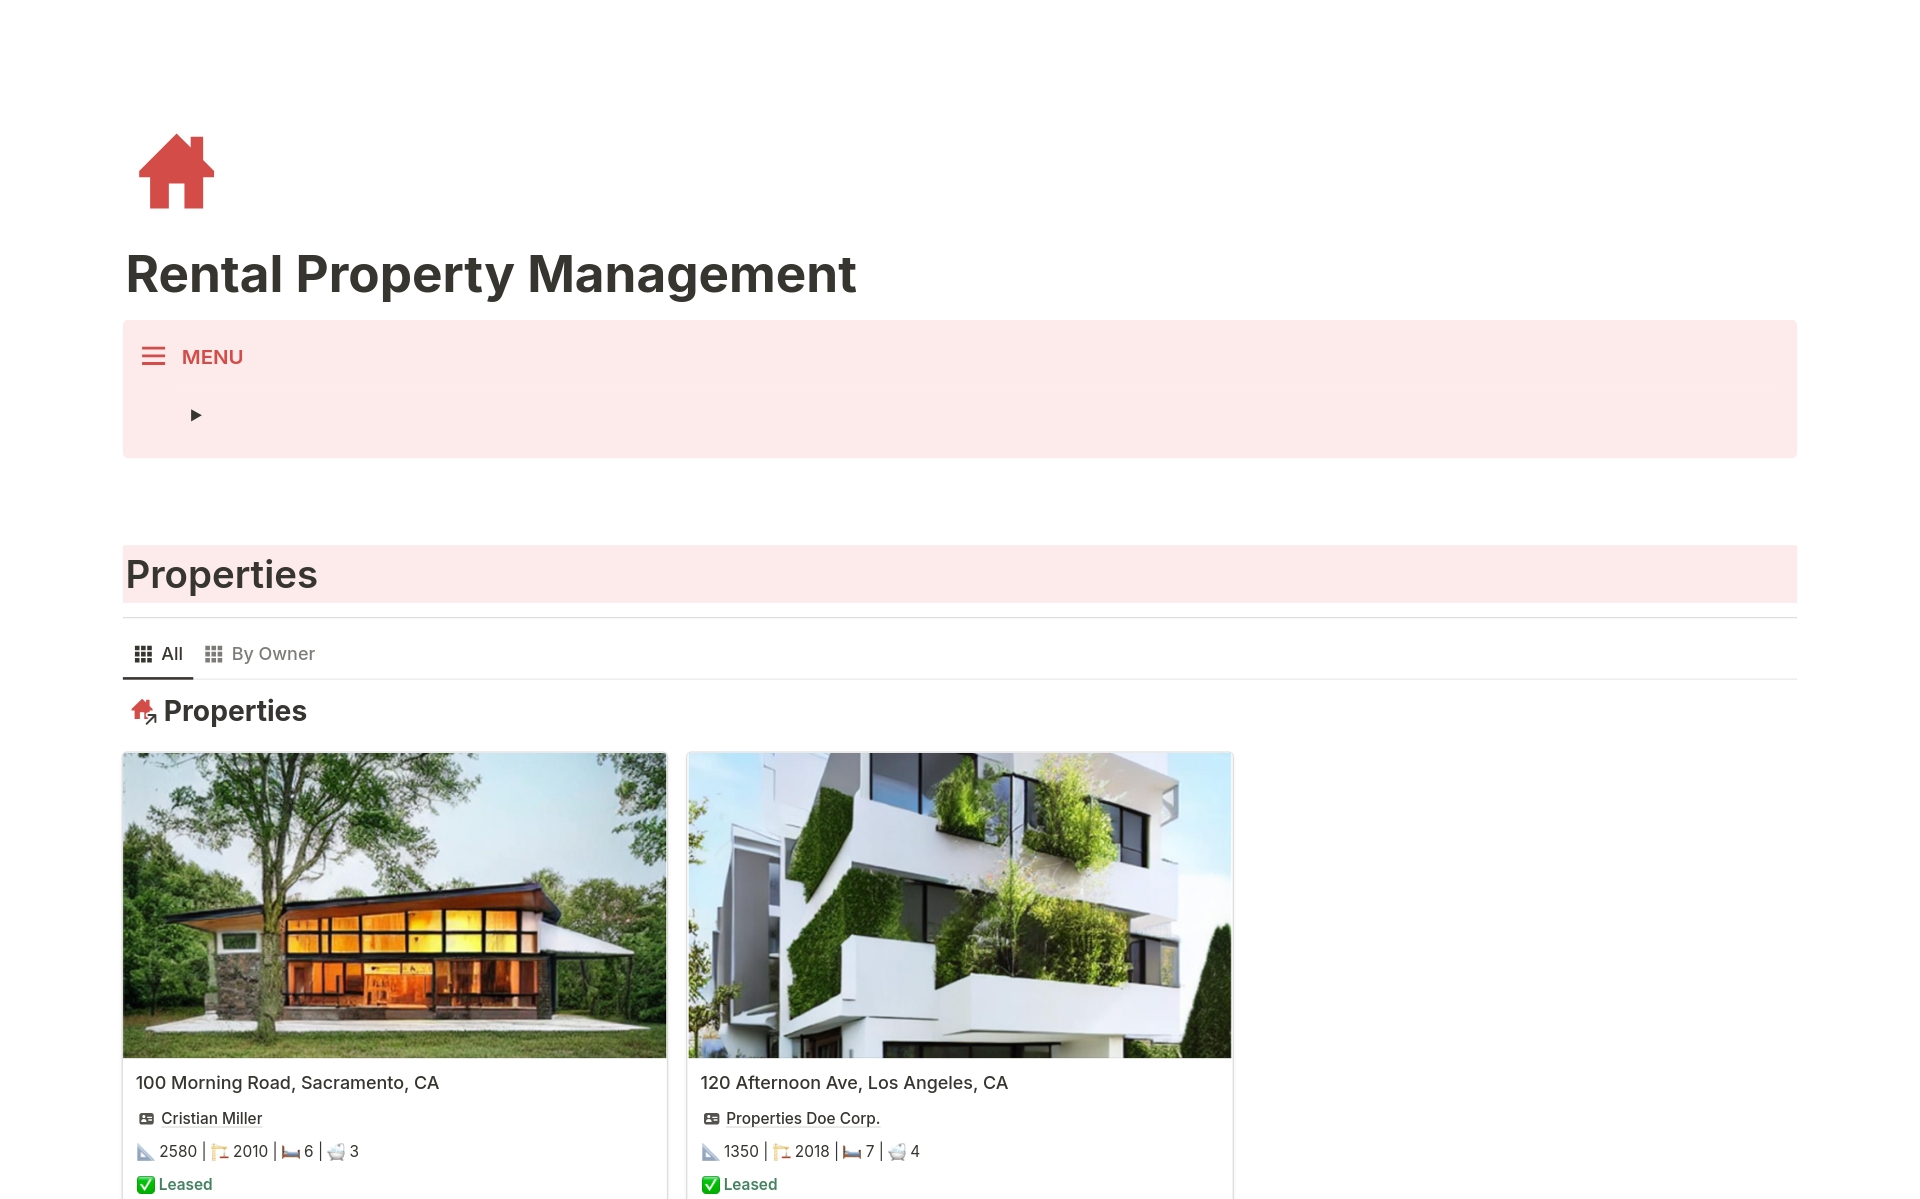 Rental Property Management simplifies and optimizes property and tenant tracking, income and expenses, service requests, vendors, and tasks for property owners managing one or multiple properties.